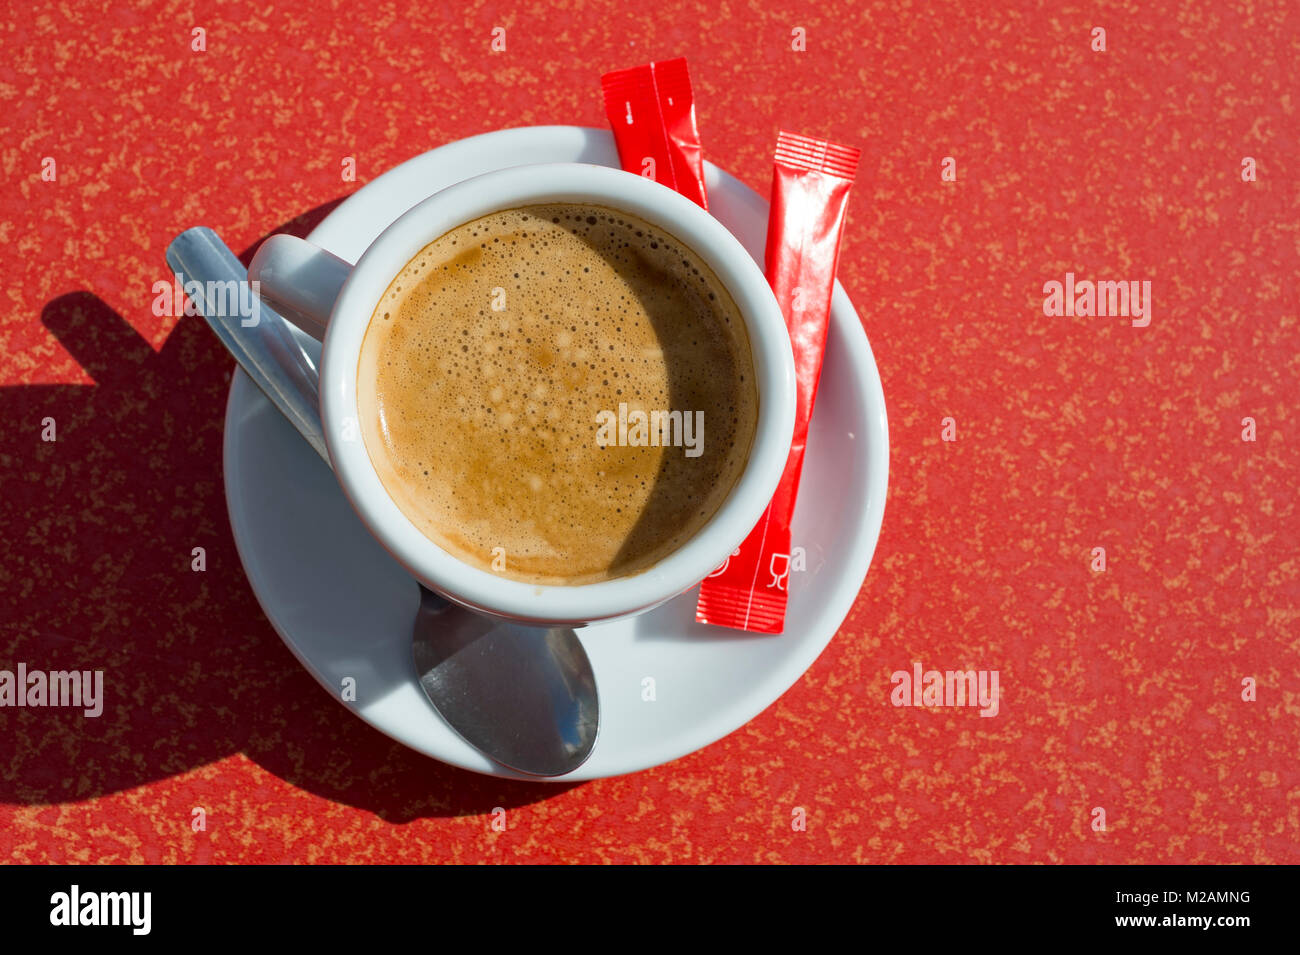 cup of fresh coffee on a red cafe table viewed from above. Stock Photo